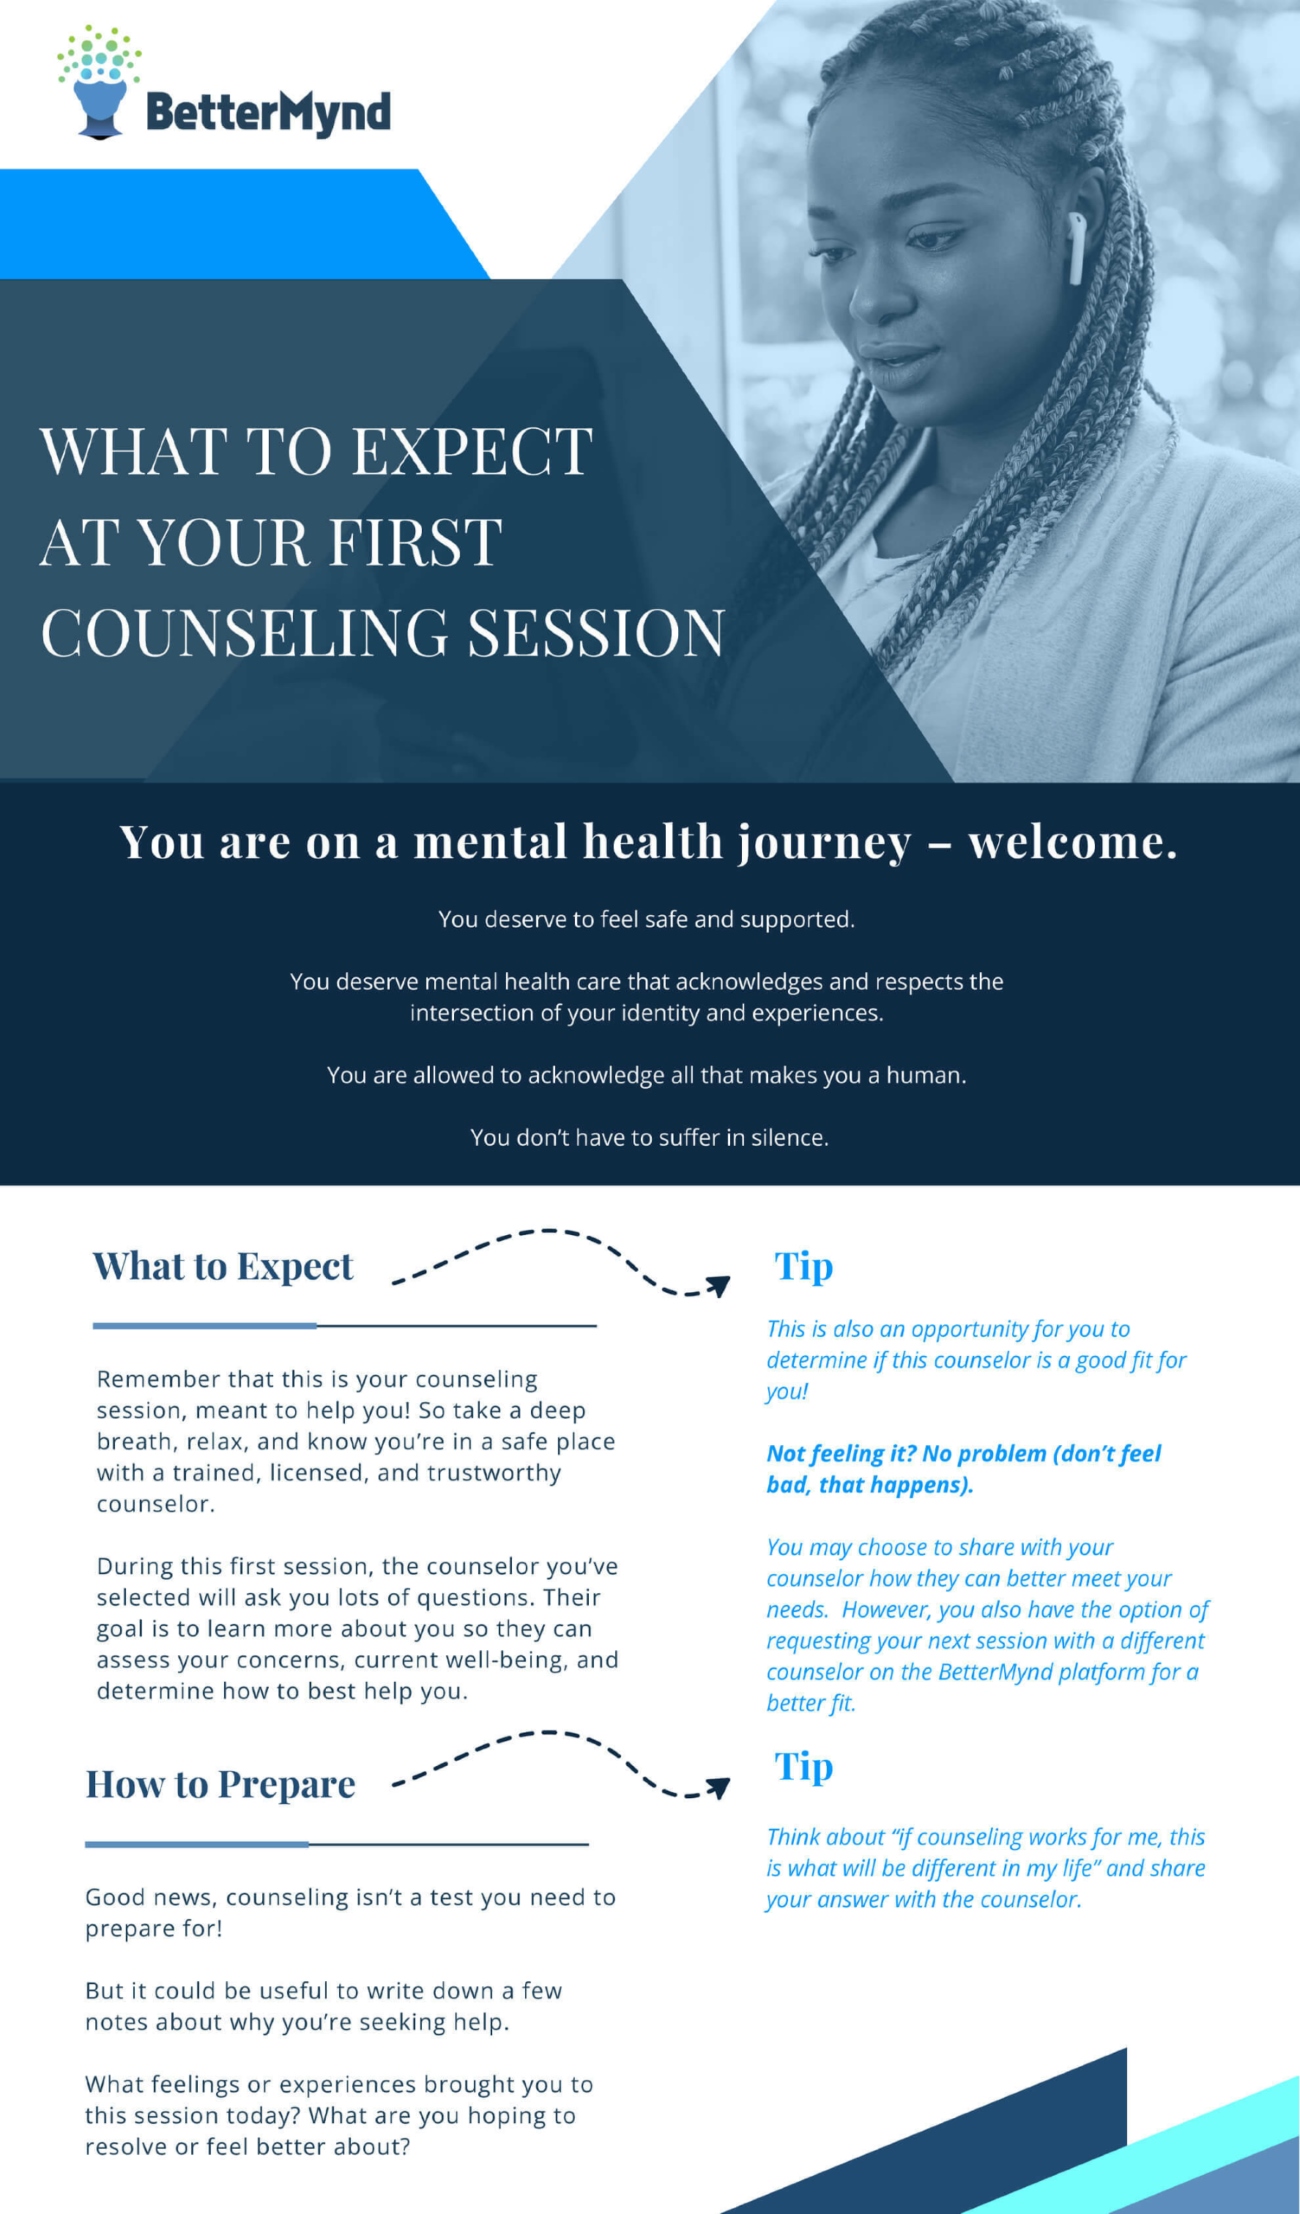 What to expect at your first counseling session